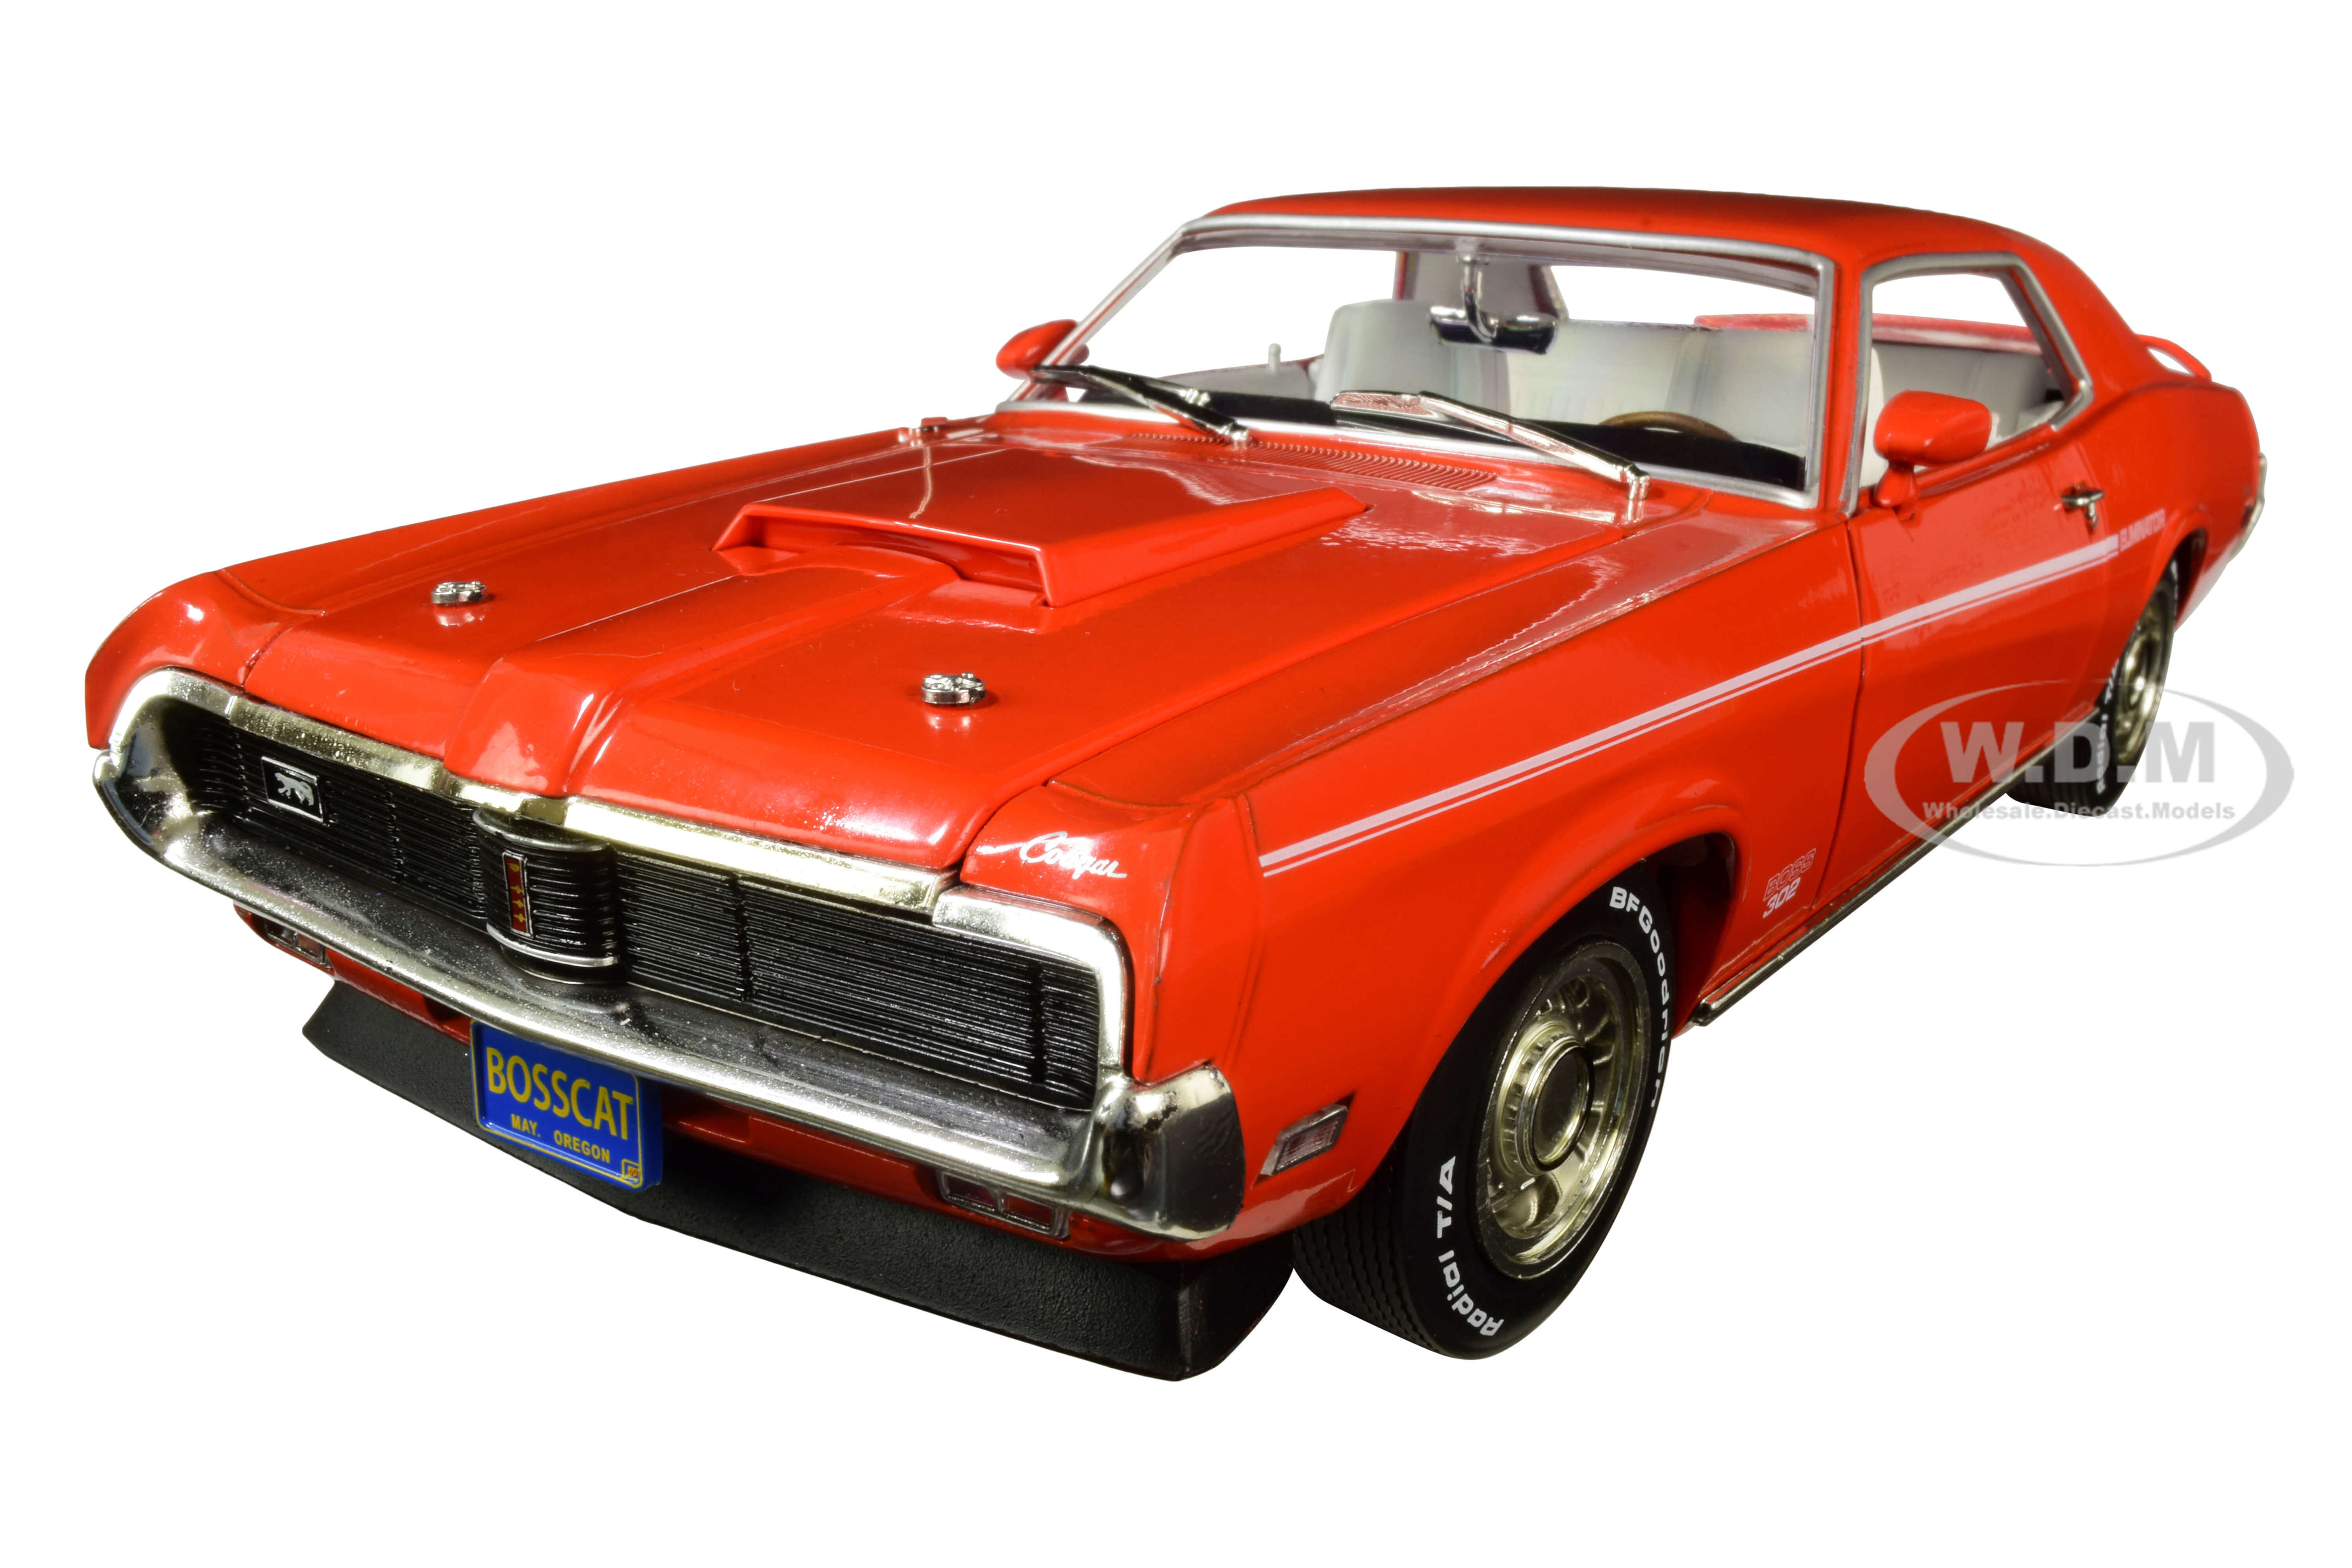 1969 Mercury Cougar Eliminator Hardtop Competition Orange With White Stripes "50th Anniversary Of The Boss Engines" (1969-2019) 1/18 Diecast Model Ca